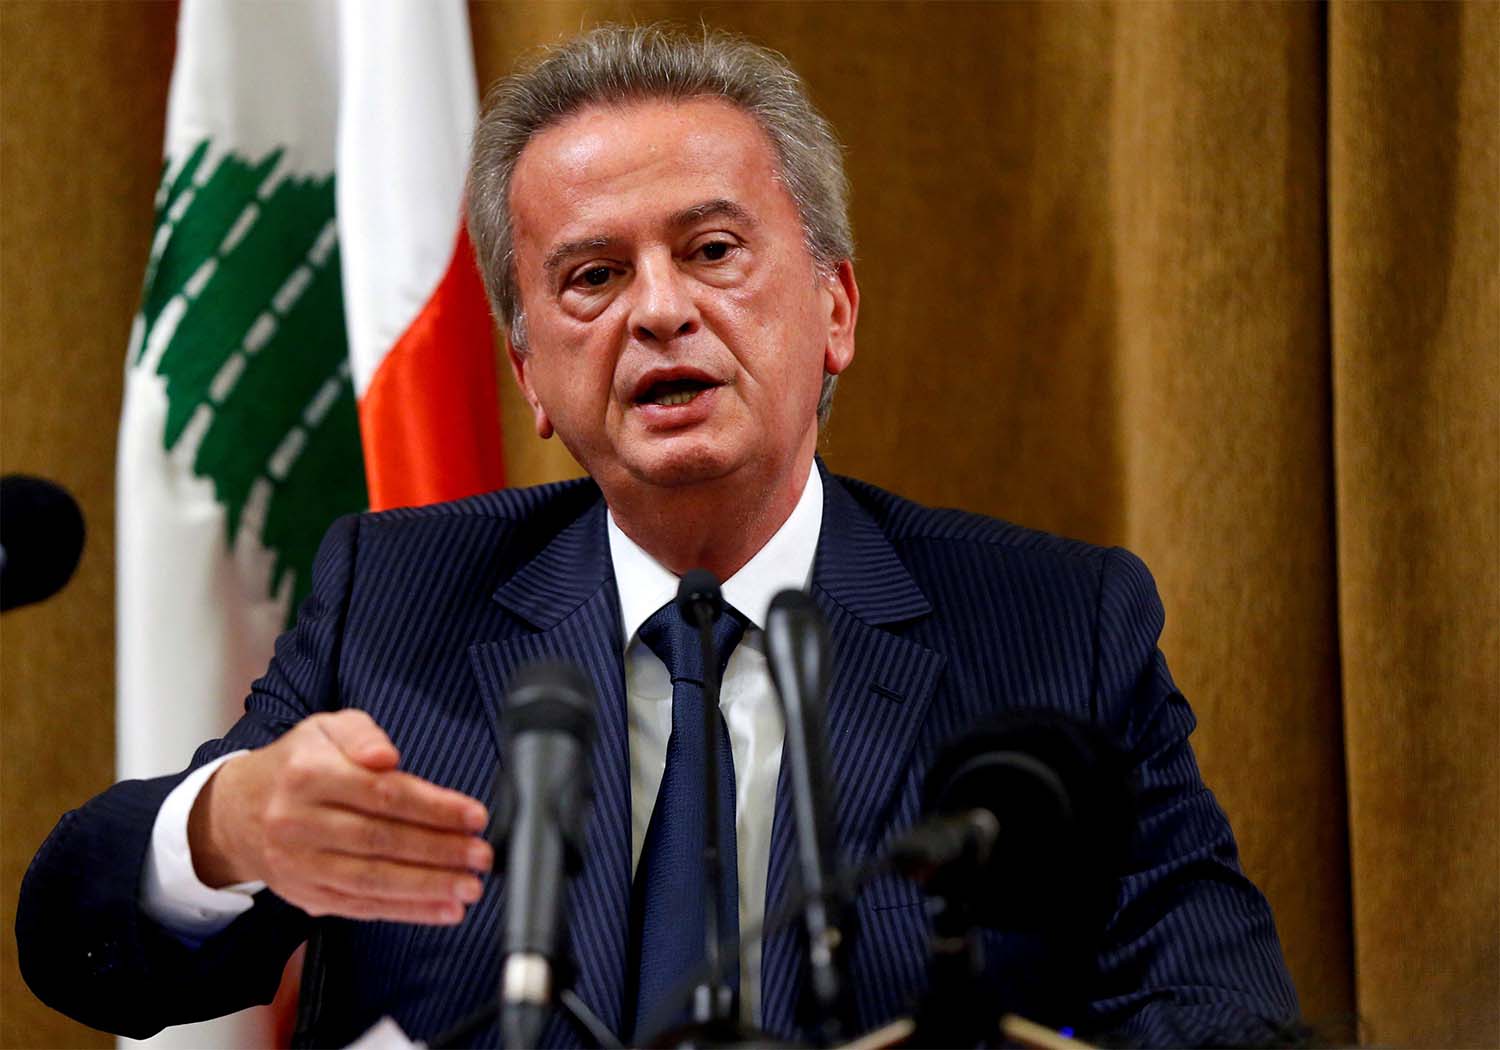 Salameh was worth $23 million in 1993, prior to his appointment as central bank's governor